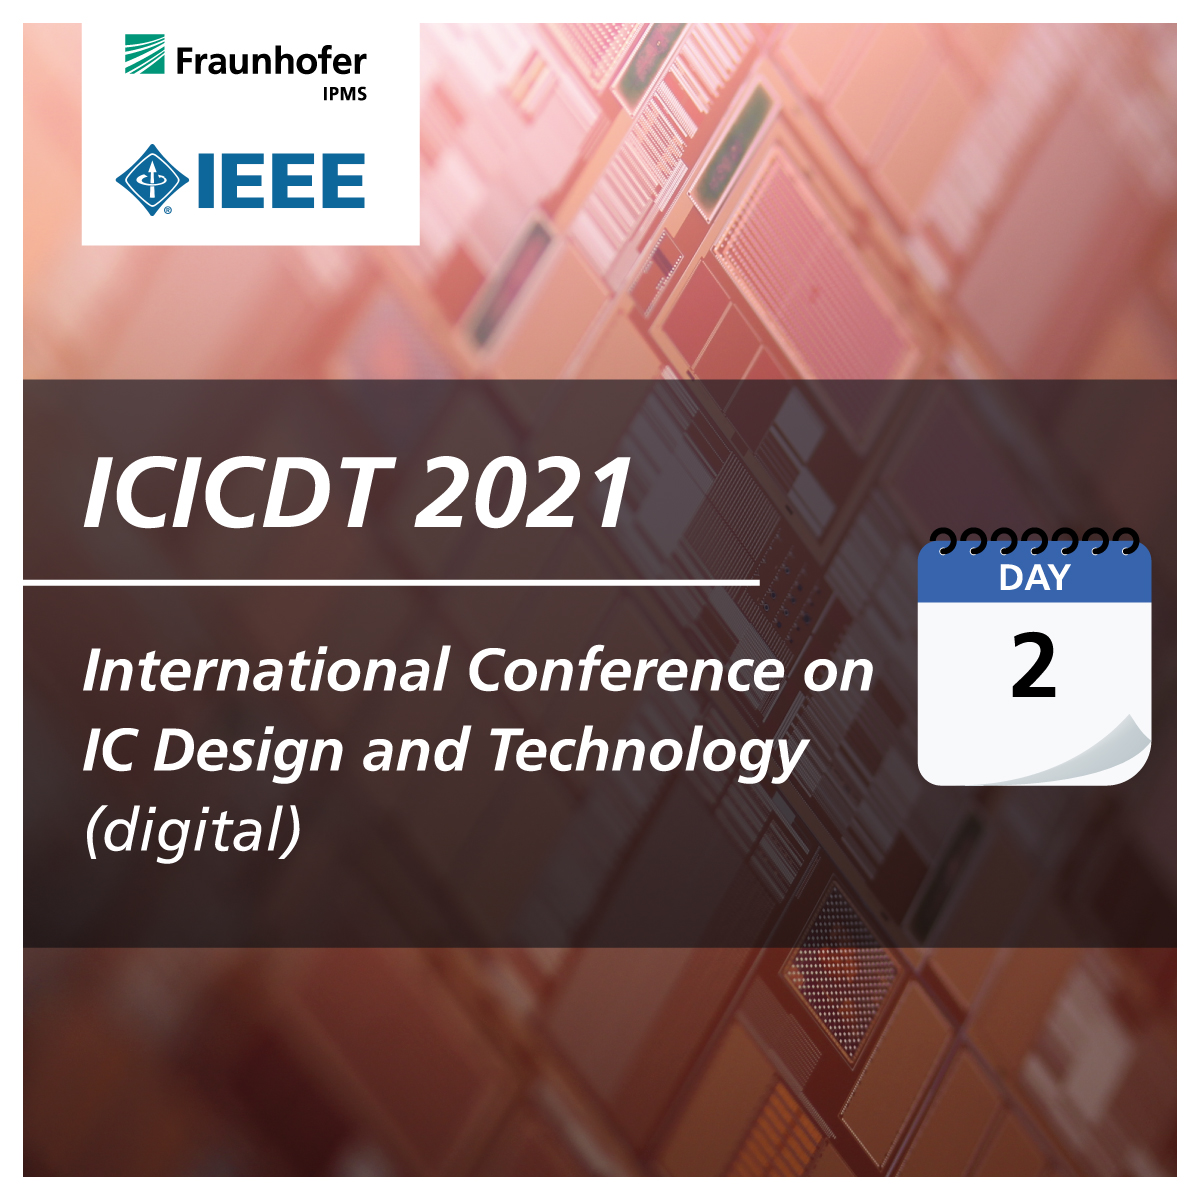 We are about to kick off day 2 of the virtual ICICDT 2021, you can still join us and access all online content and networking possibilities - have a look: s.fhg.de/icicdt2021

#ICdesign #semiconductor #dresden #saxony #FraunhoferIPMS #IEEE #ICTechnology #Saxony